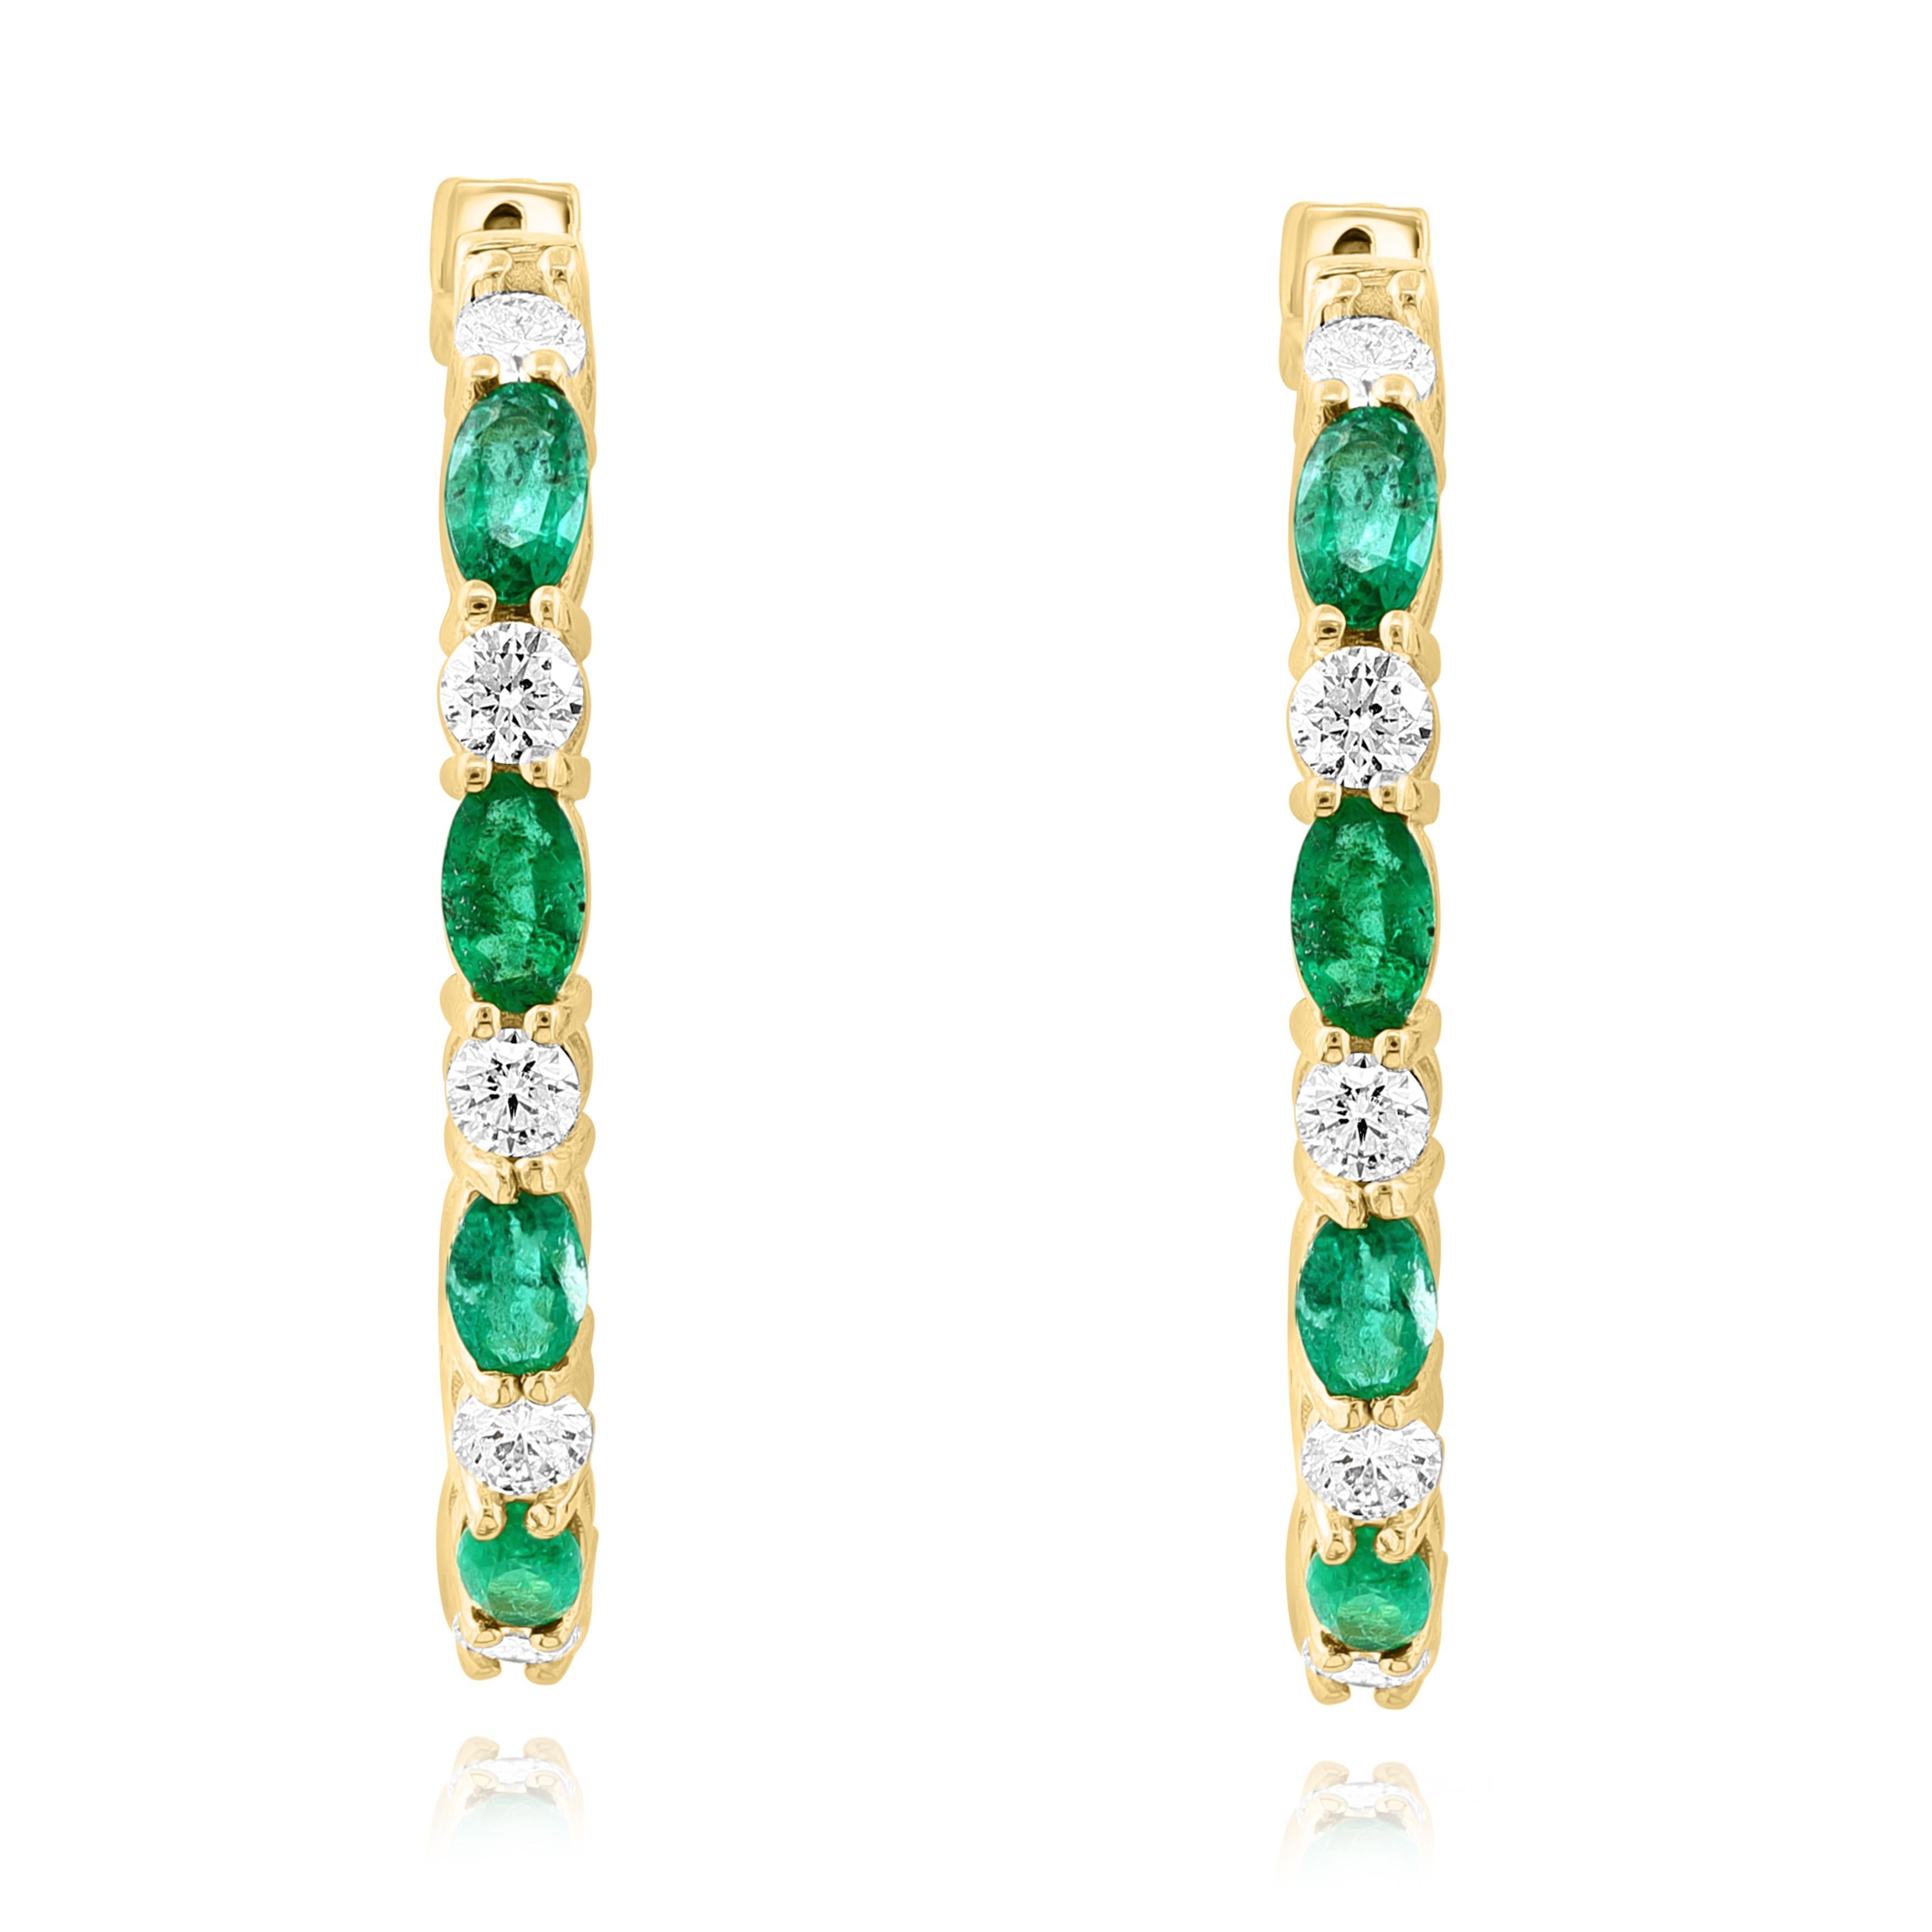 Contemporary 3.13 Carat Oval Cut Emerald and Diamond Hoop Earrings in 14K Yellow Gold For Sale